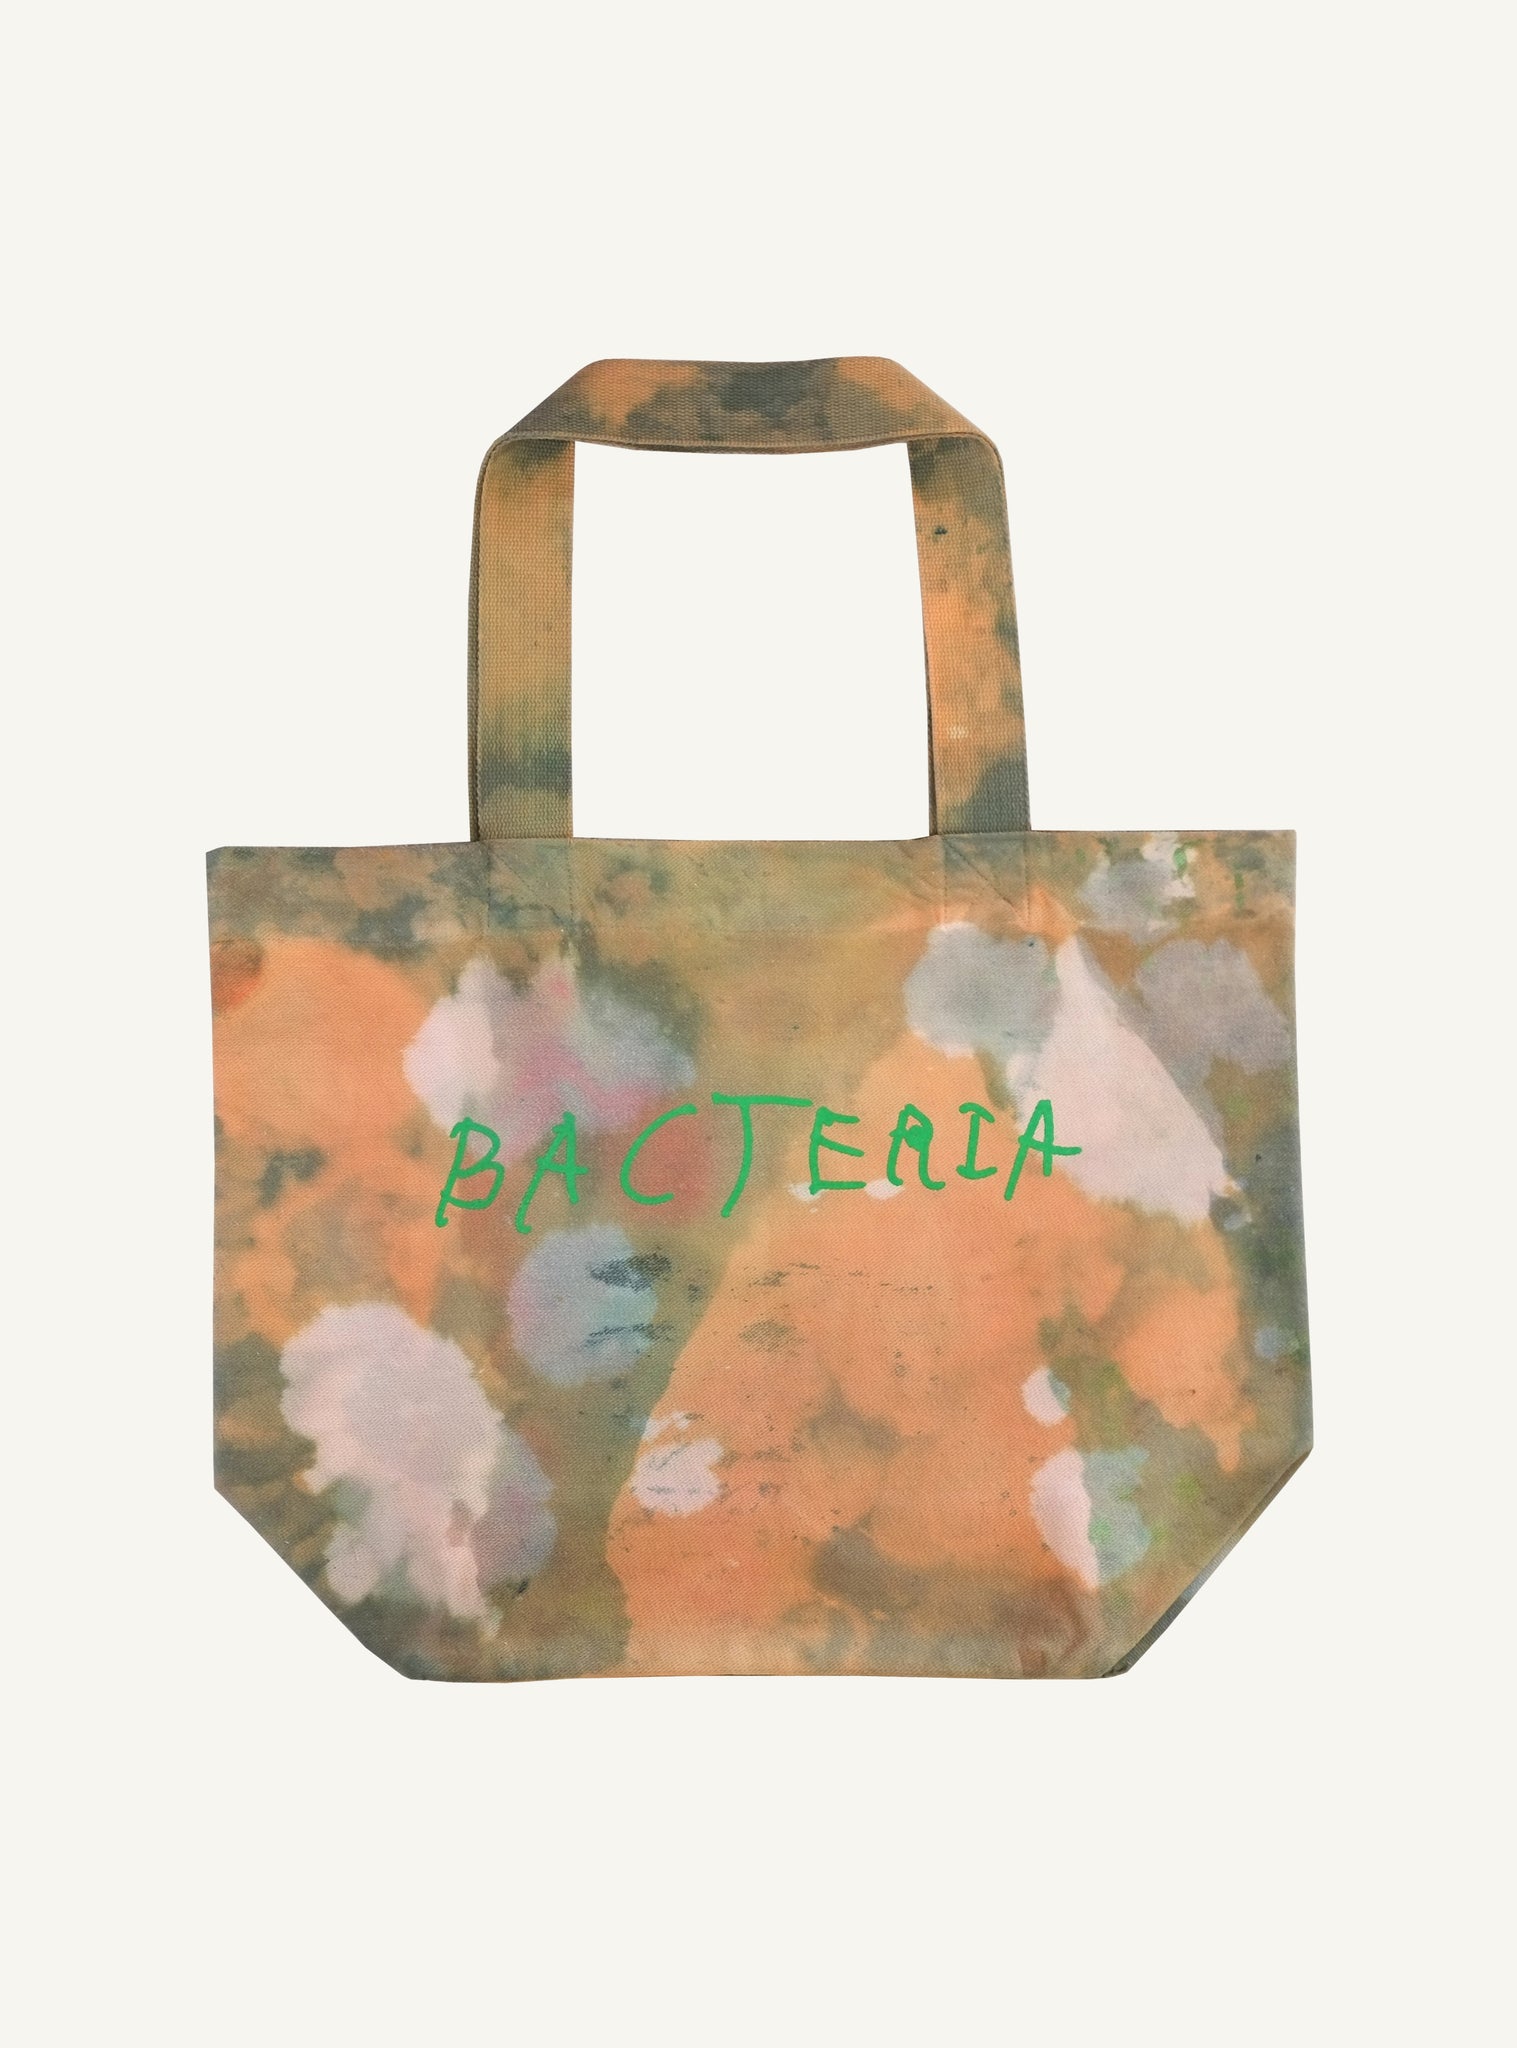 BACTERIA X ZAROYKO — Low Bacteria Count at Summit with Clouds Tote